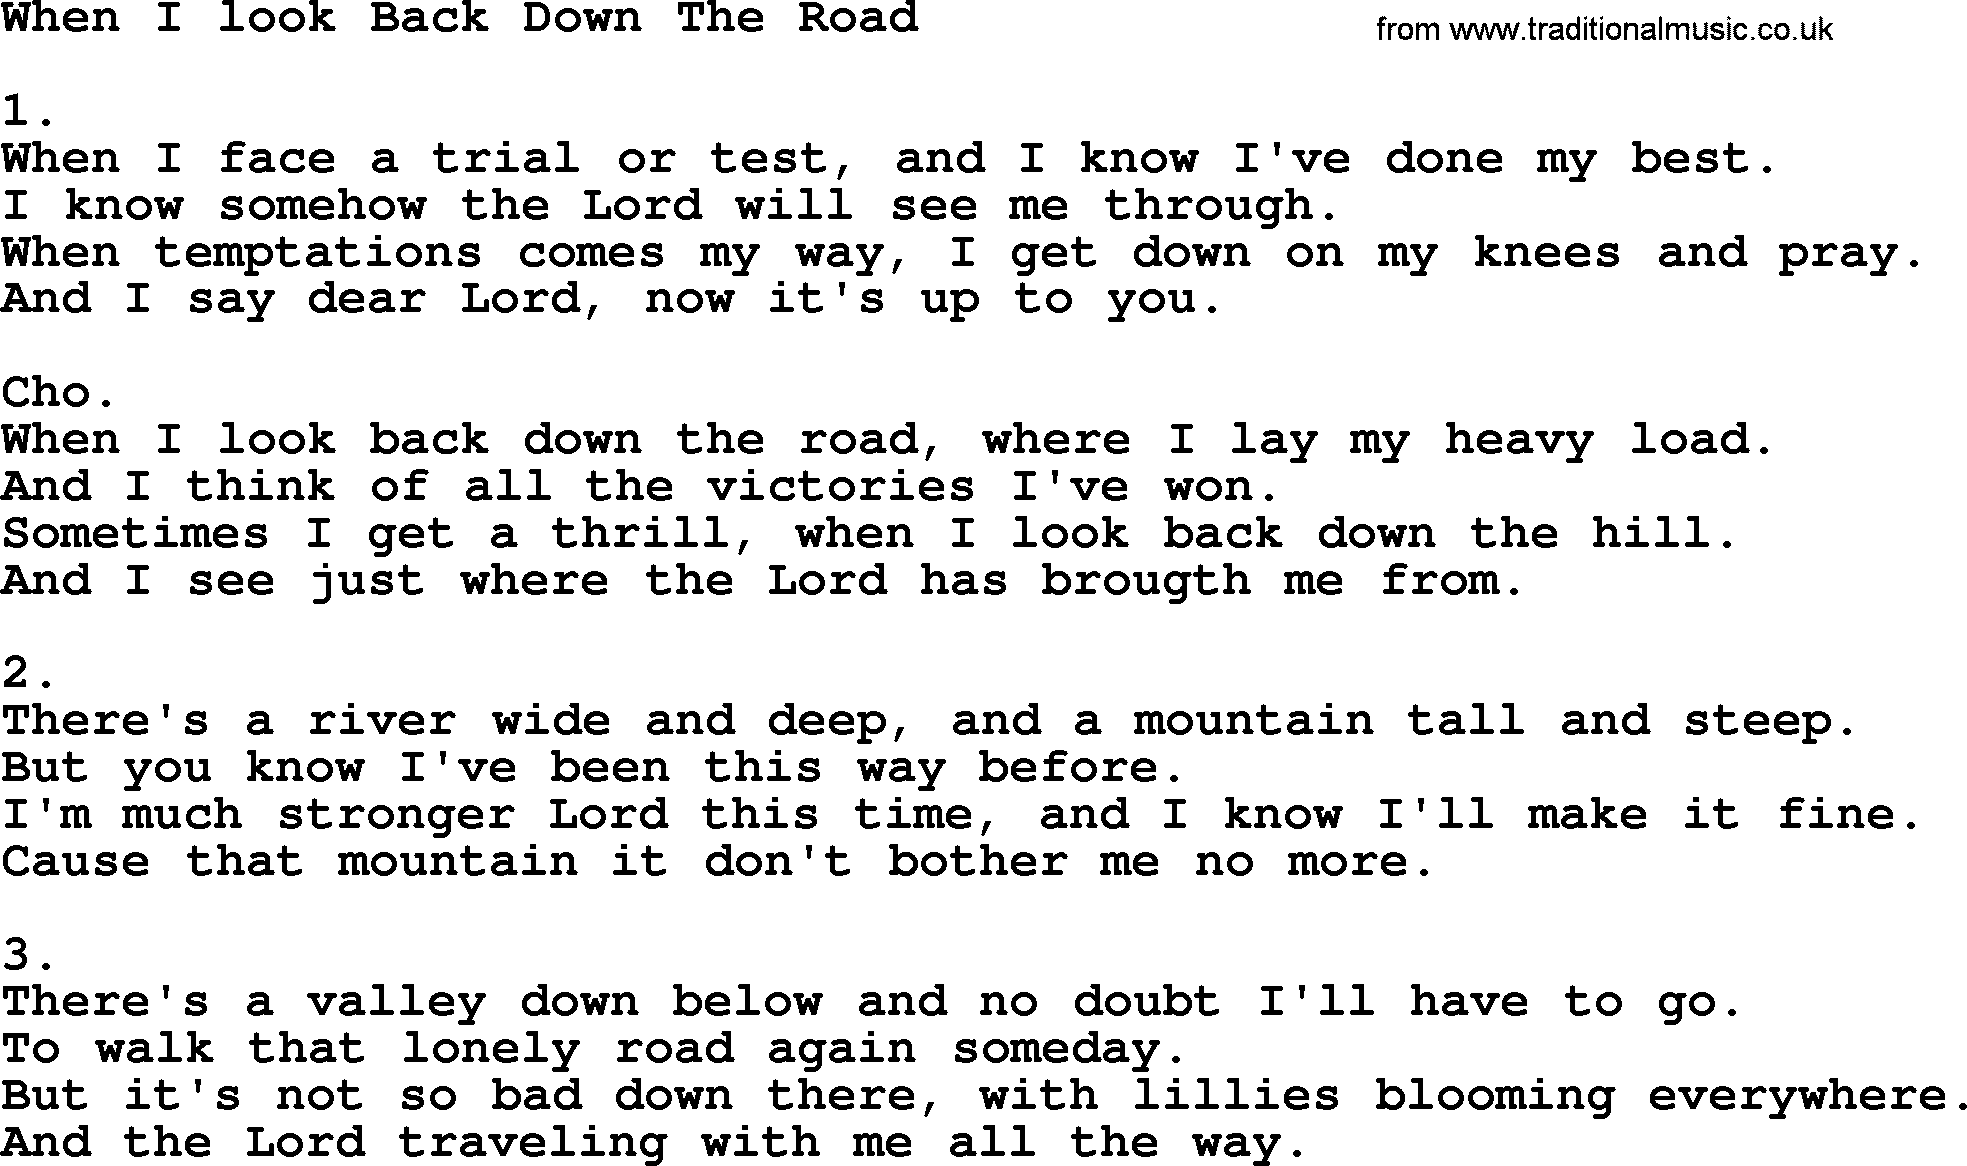 Apostolic & Pentecostal Hymns and Songs, Hymn: When I look Back Down The Road lyrics and PDF